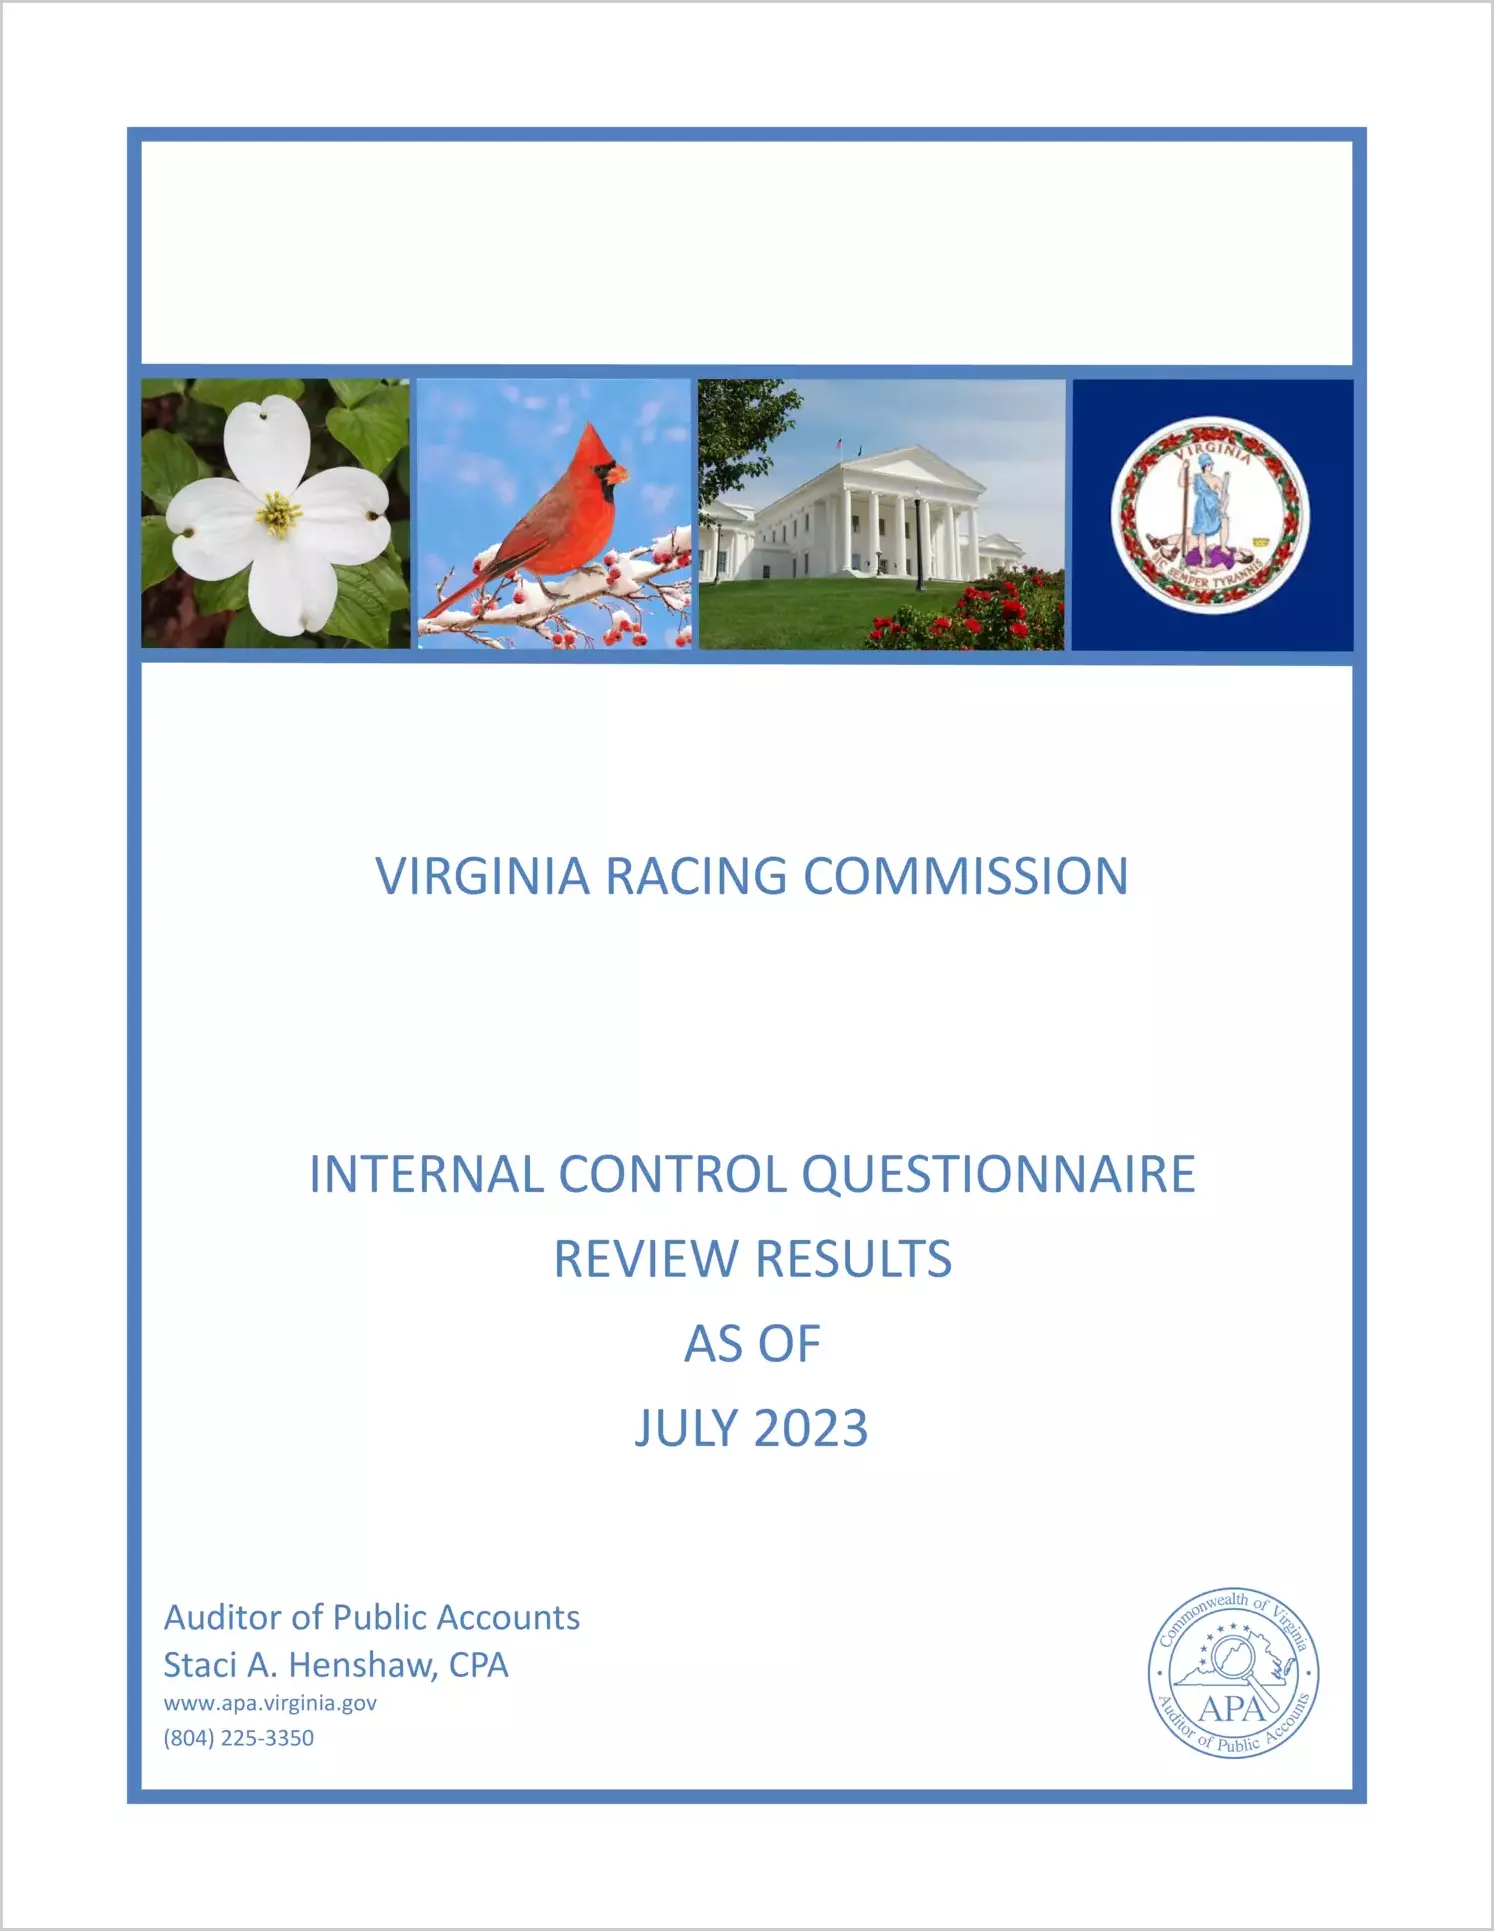 Virginia Racing Commission Internal Control Questionnaire Review Results as of July 2023